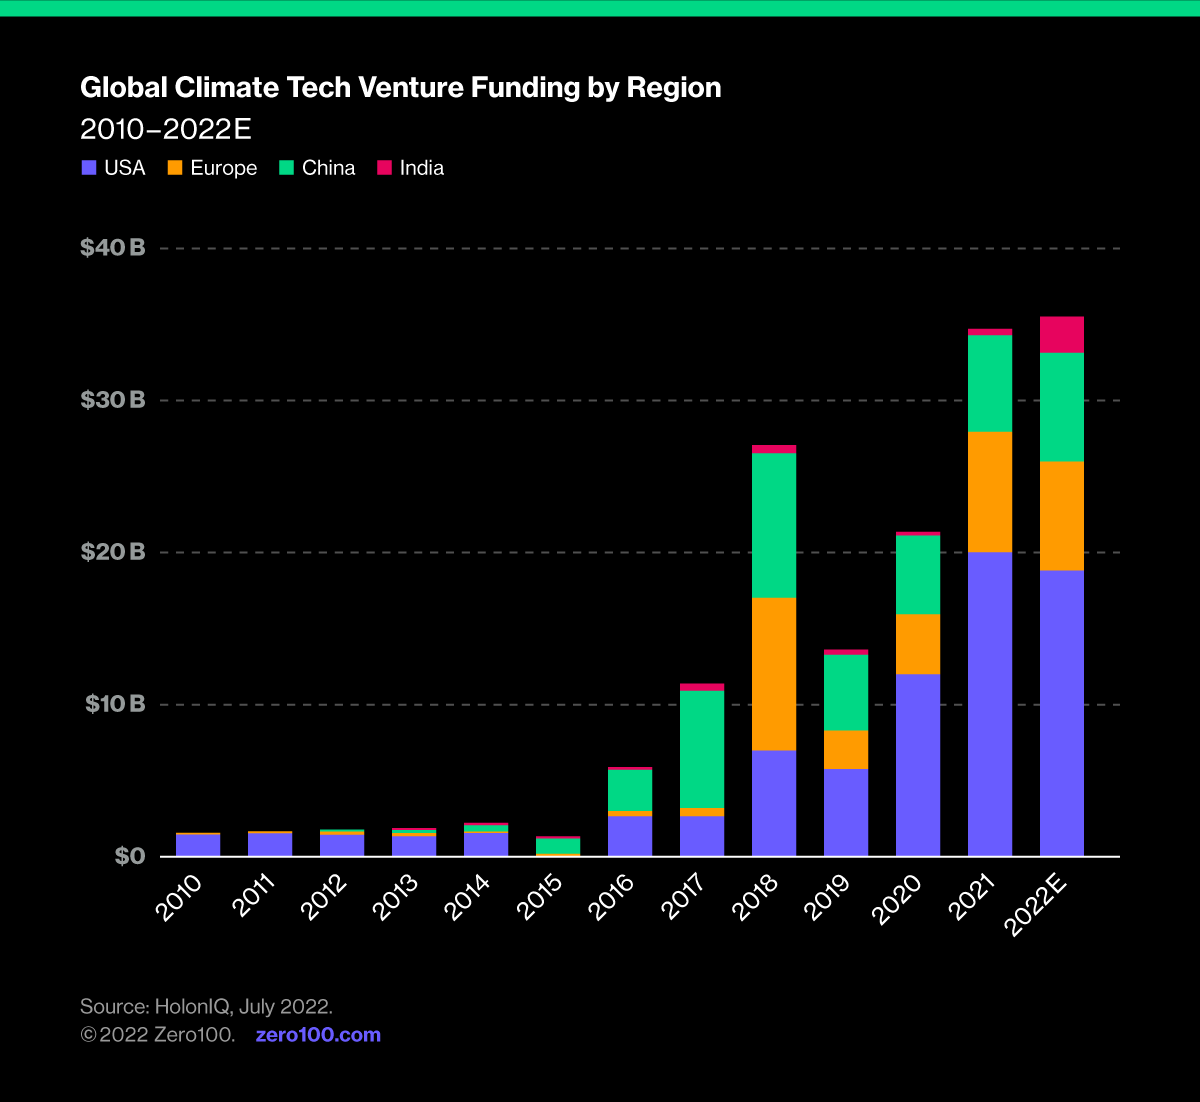 Graph depicting global climate tech venture funding by region from 2010 to 2022. Source: HolonIQ, July 2022.